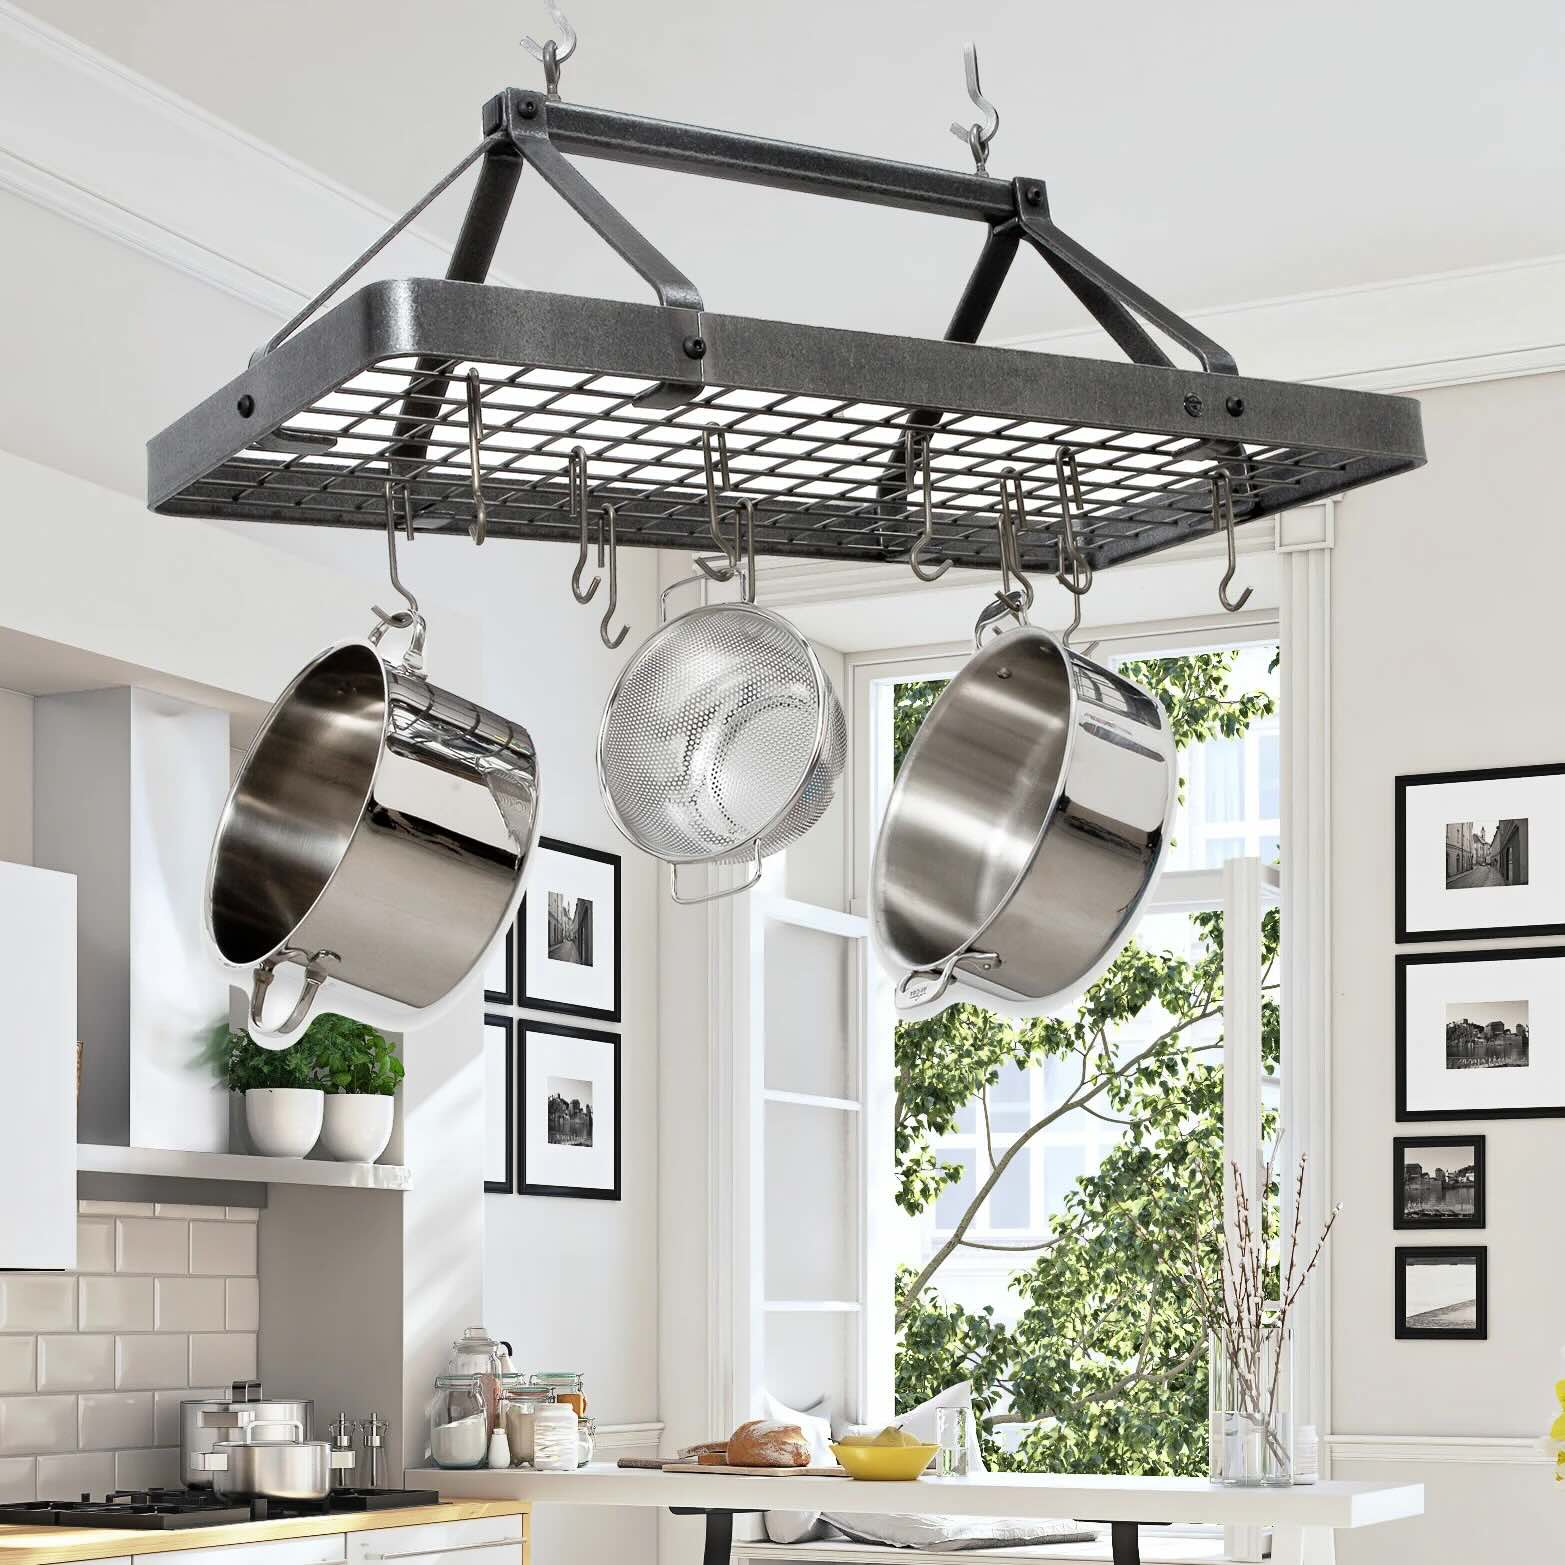 How To Hang Pot Rack From The Ceiling